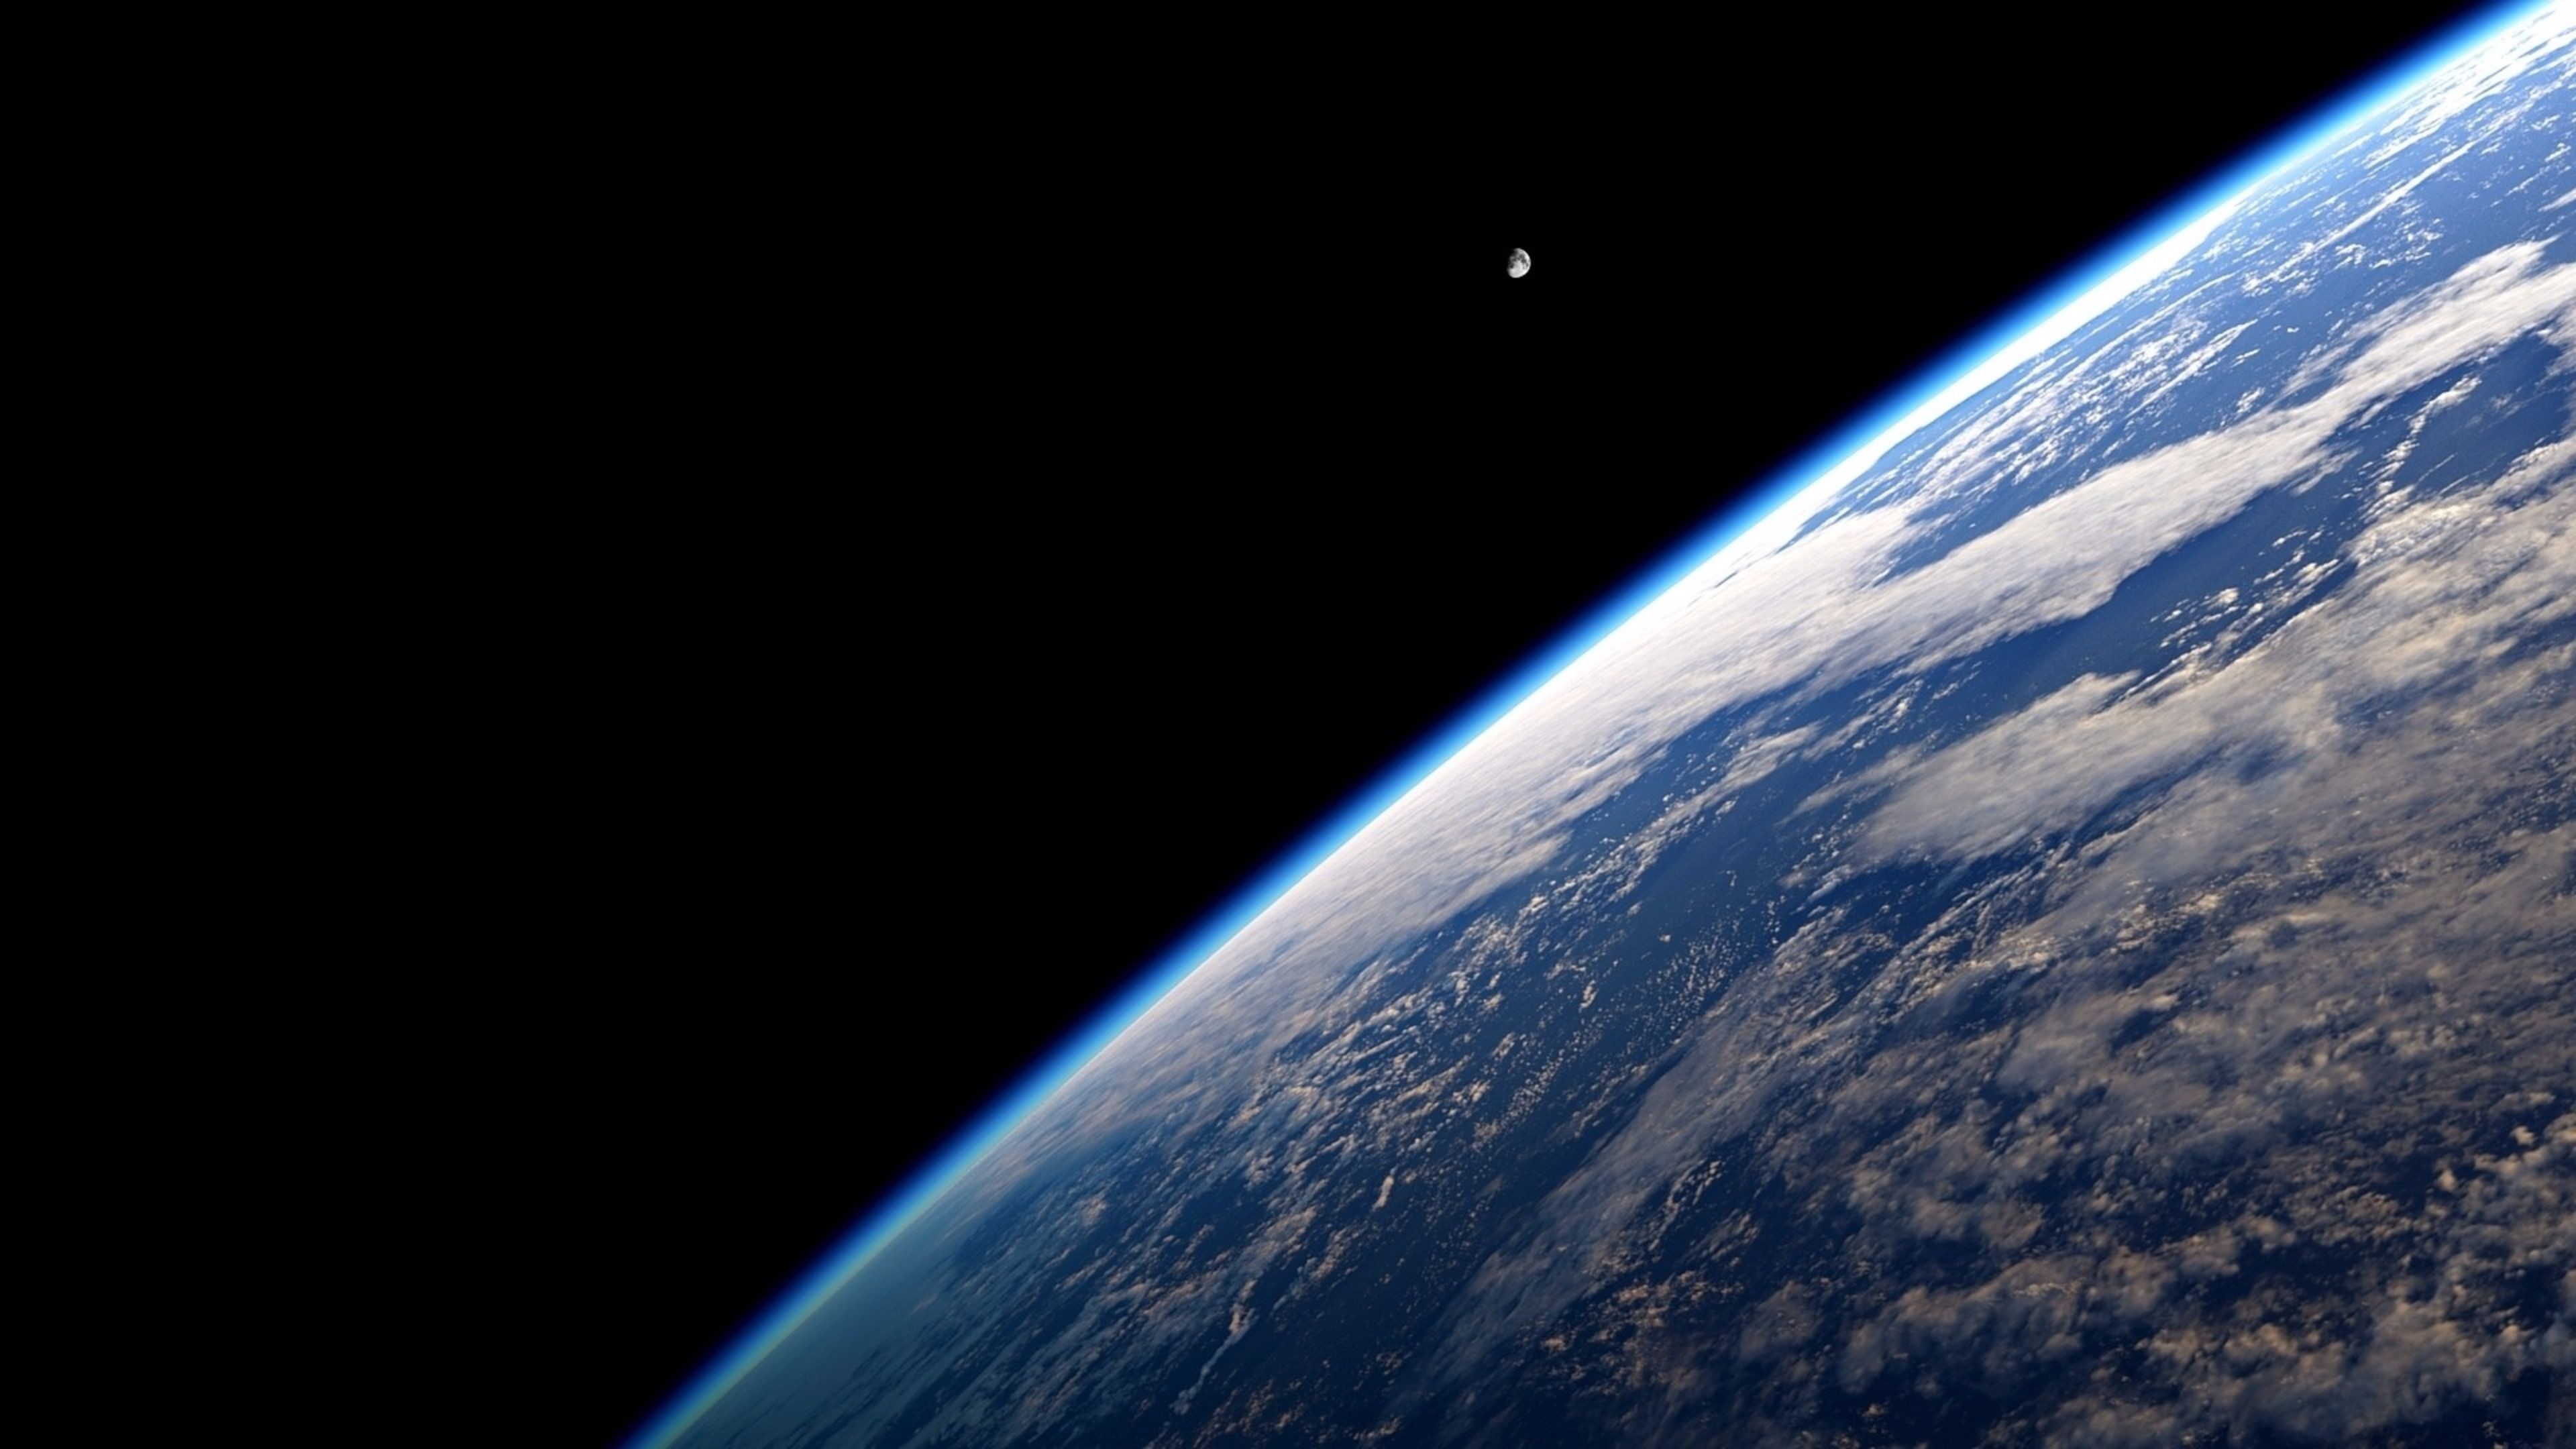 3840x2160 [1920x1080] Edge Of Earth From Space Need #iPhone #6S #Plus #